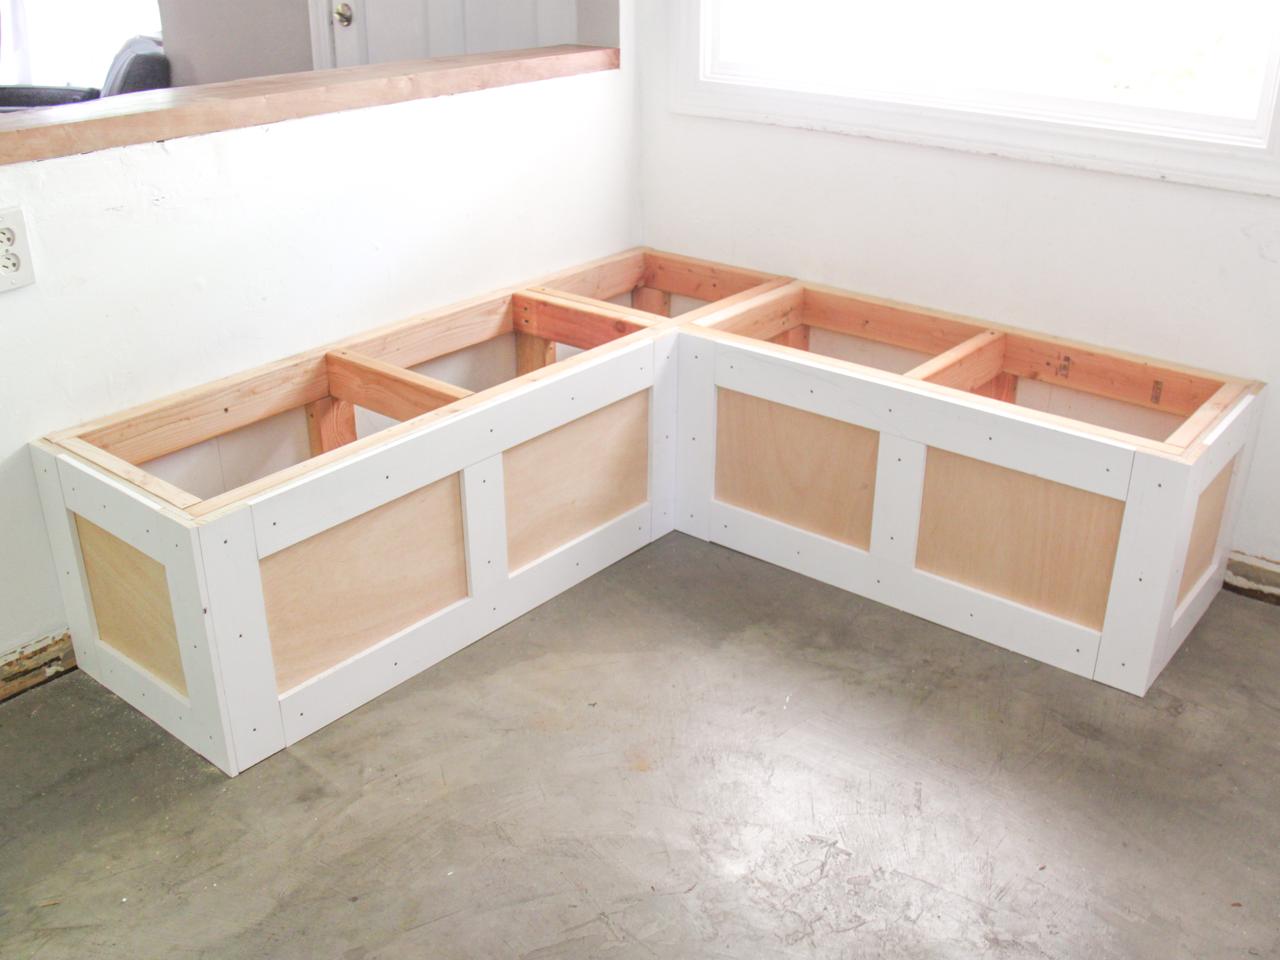 A Banquette Seat With Built In Storage, Bench Seat With Storage Plans